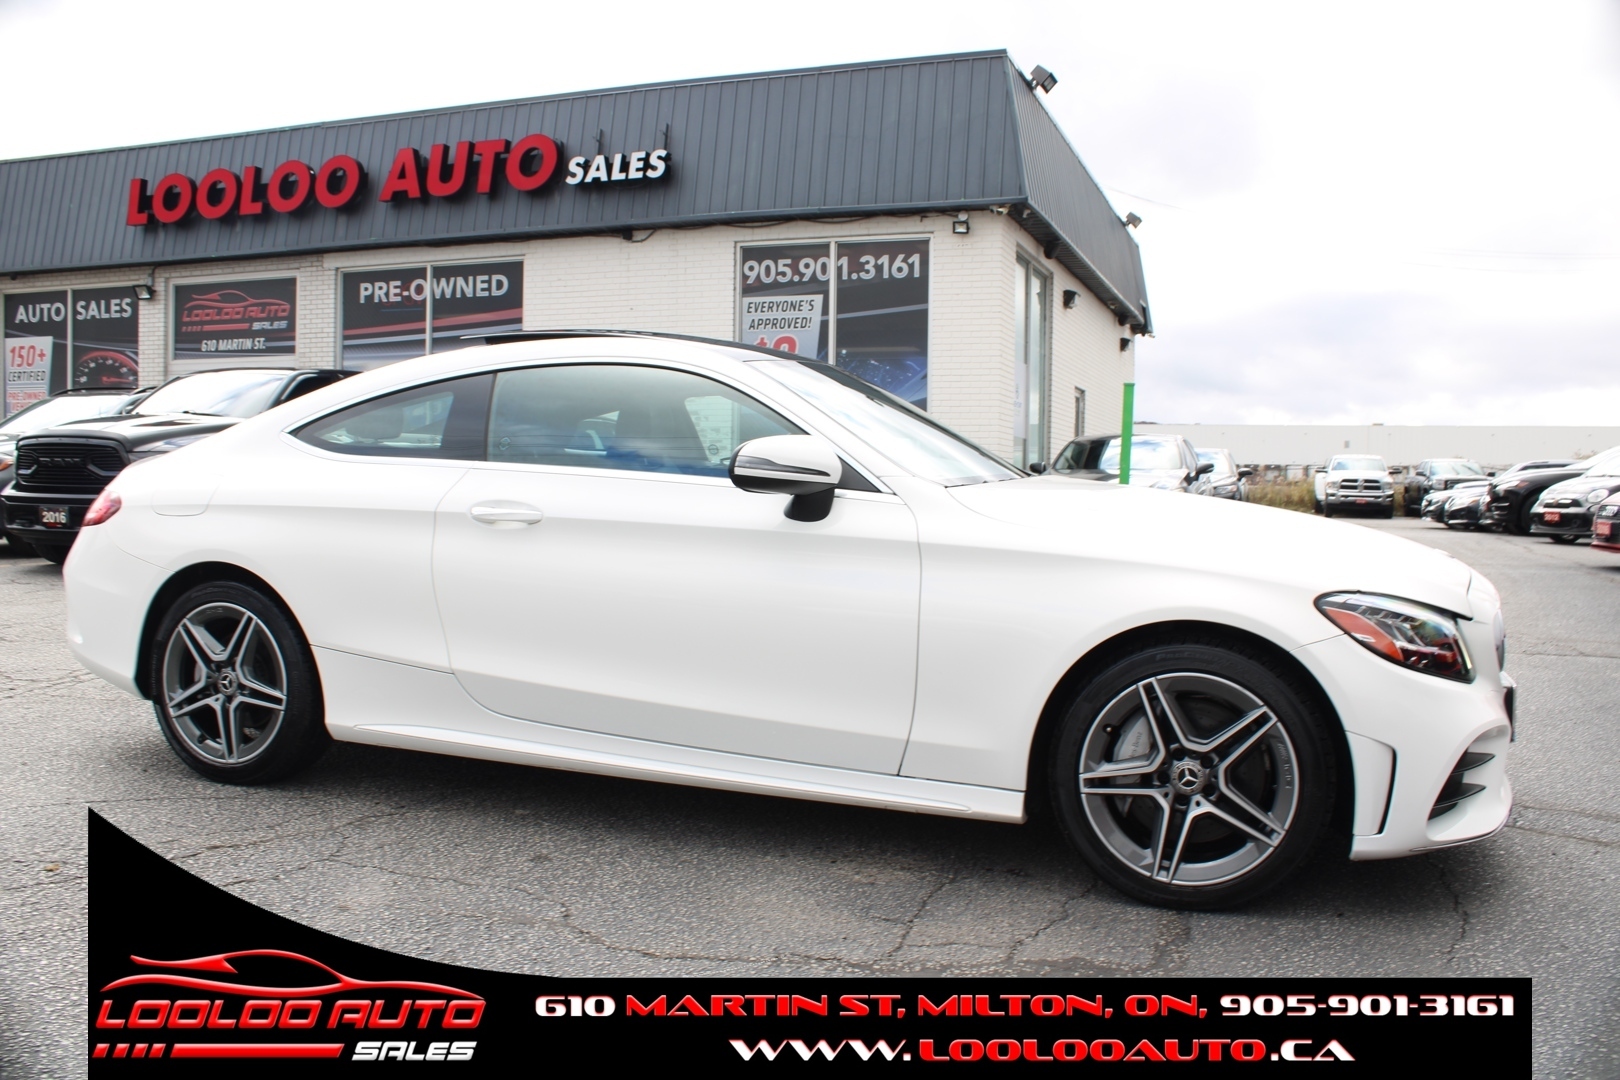 2020 Mercedes-Benz C-Class C300 4MATIC Coupe $162/Weekly Navigation Certified